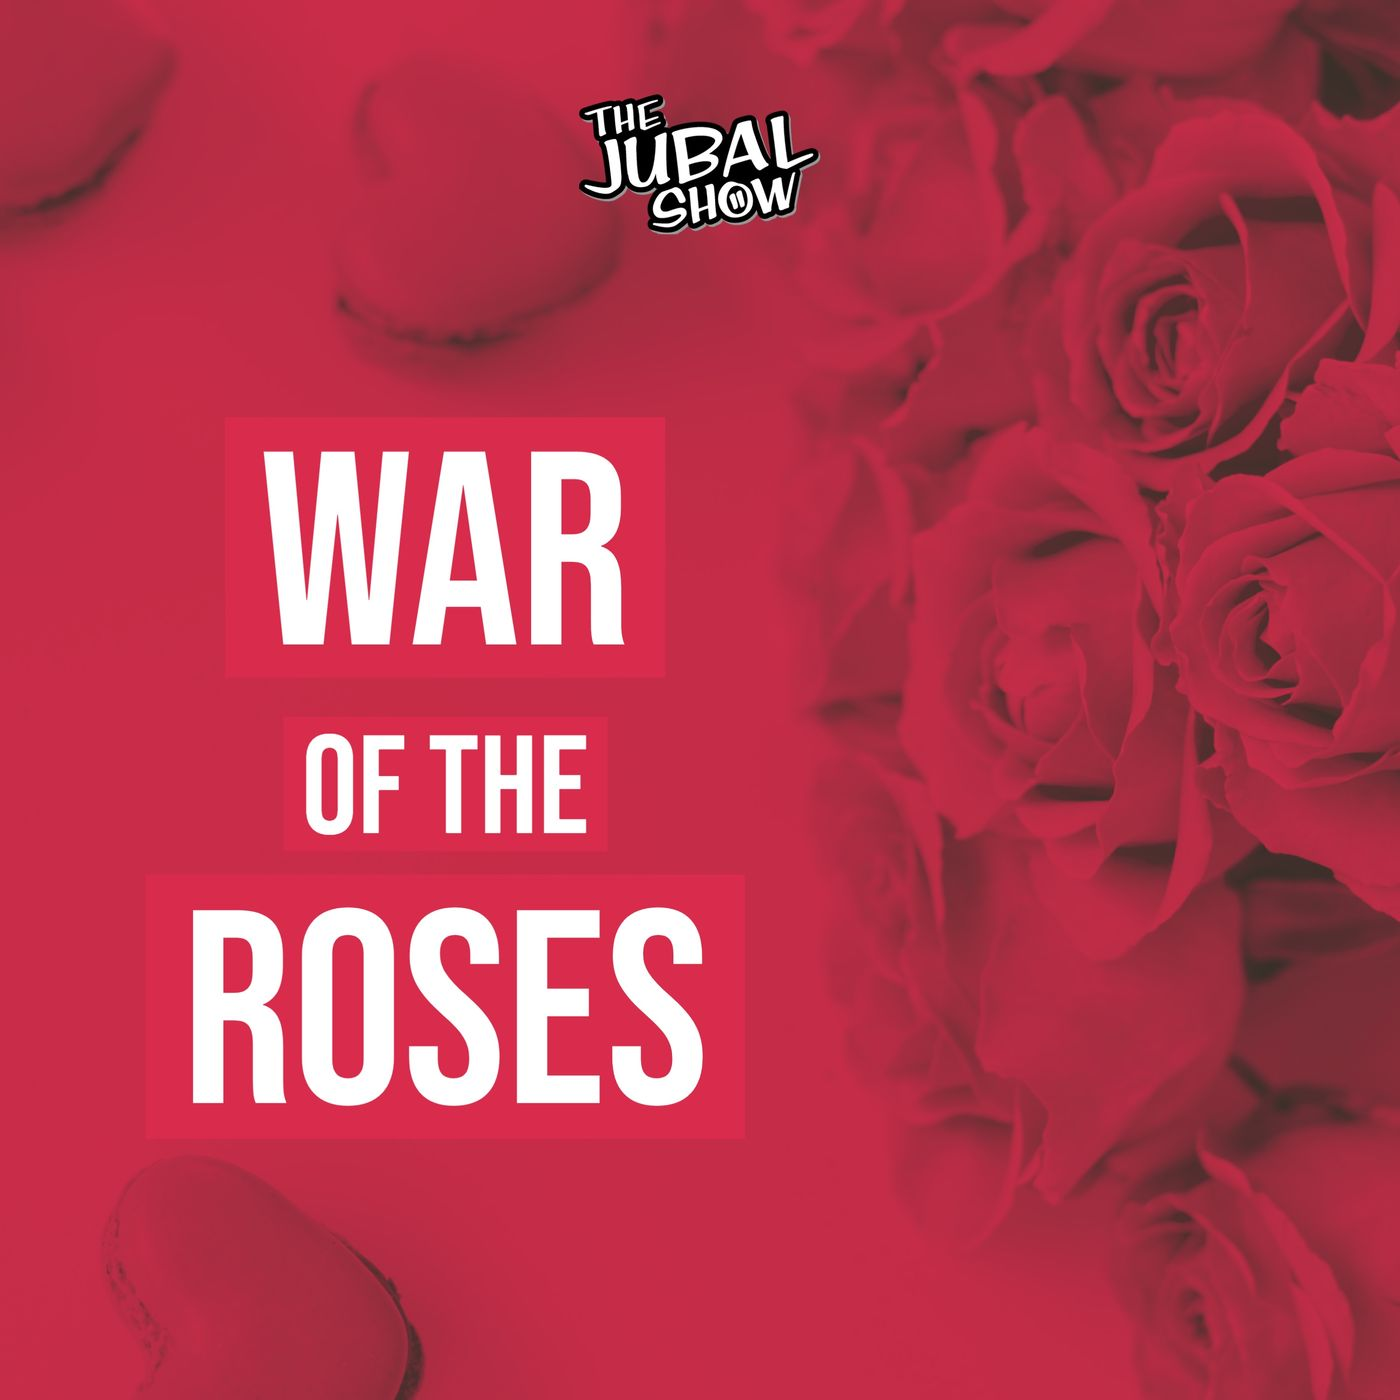 This War of the Roses is shock, after shock, after shock!